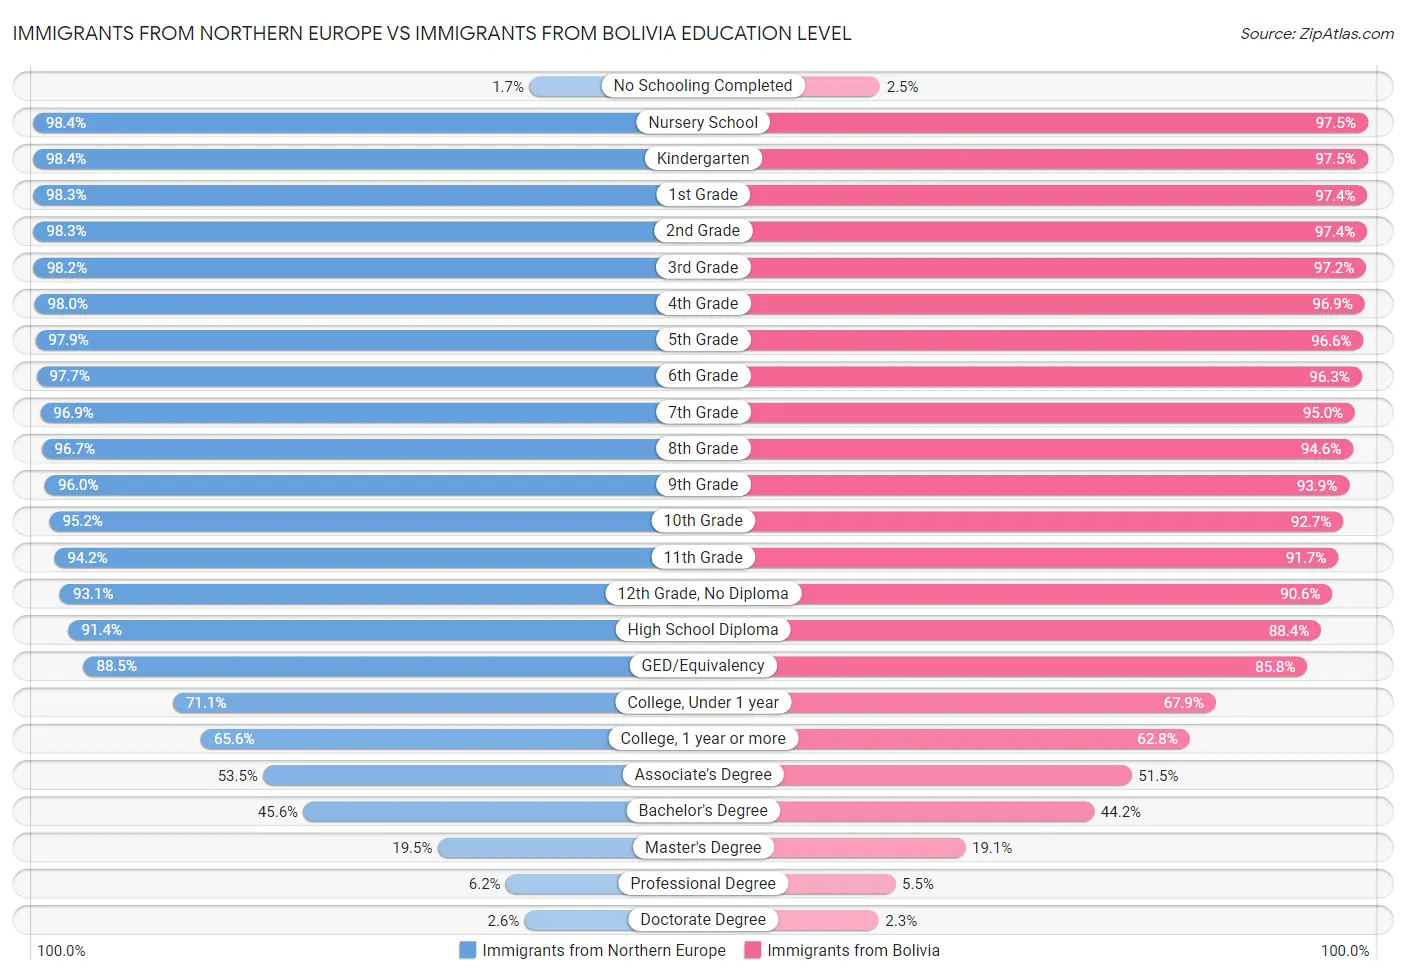 Immigrants from Northern Europe vs Immigrants from Bolivia Education Level